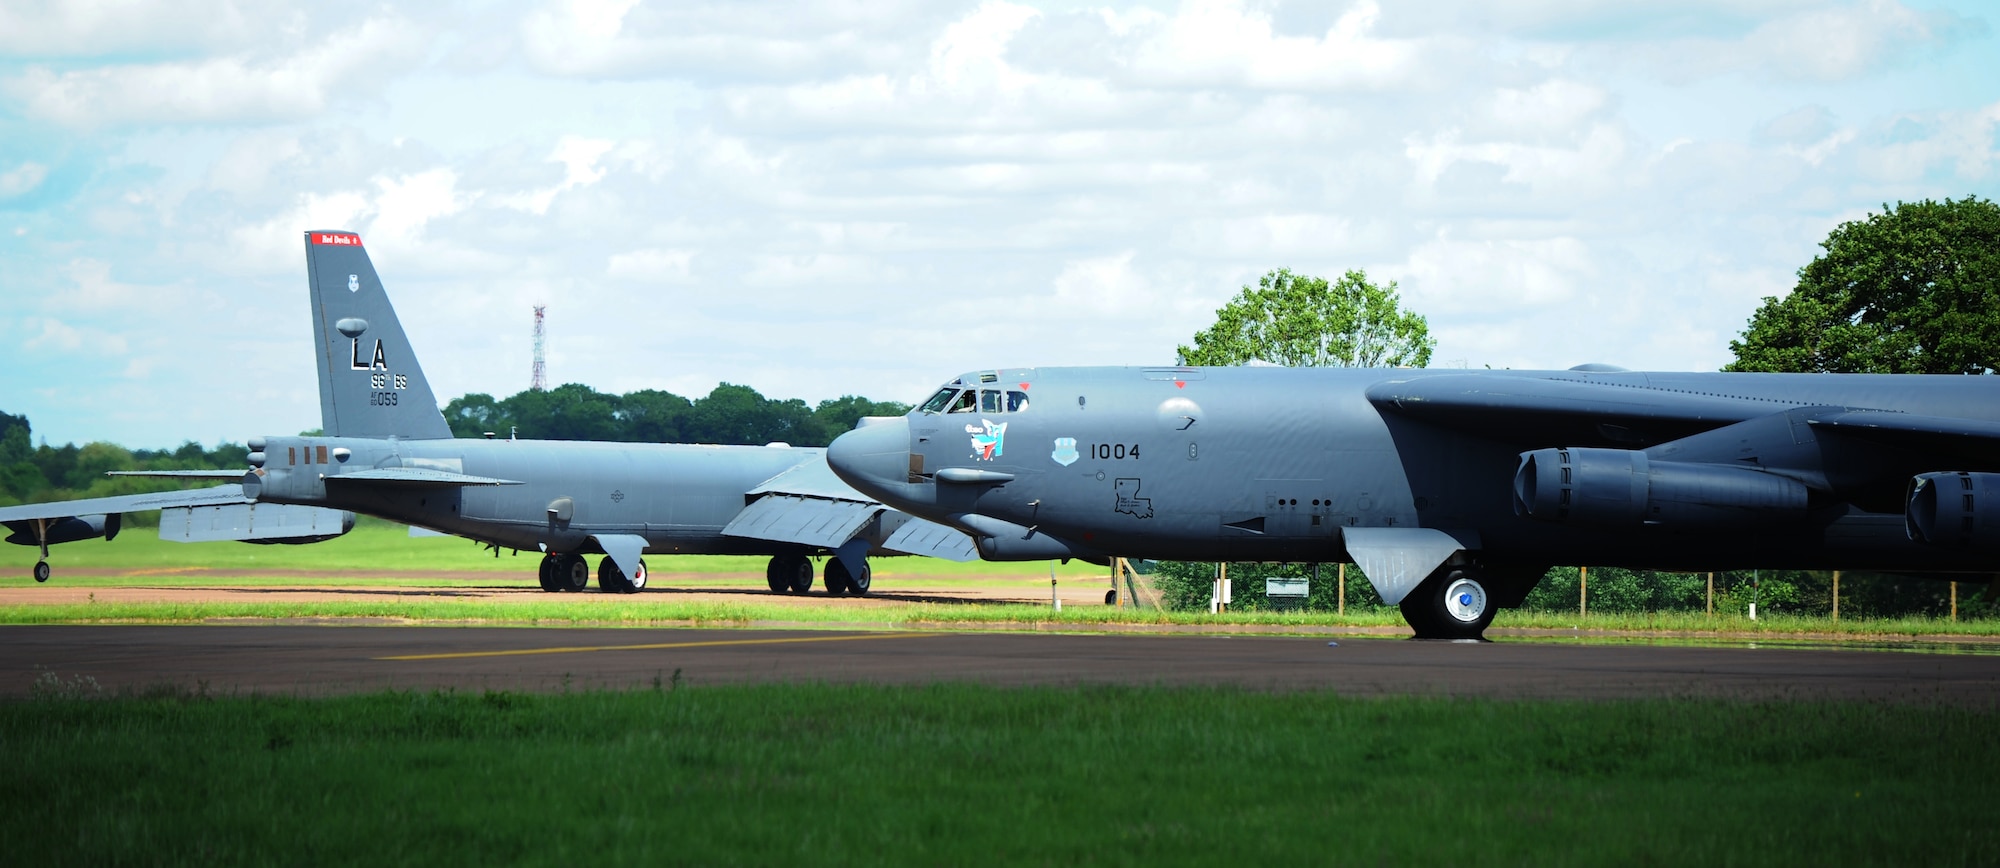 B-52 Stratofortresses from the 2nd Bomb Wing, Barksdale Air Force Base, La, and 5th Bomb Wing, Minot Air Force Base, N.D., taxi toward the runway at Royal Air Force Base Fairford, United Kingdom, June 7, 2014. The B-52s flew over the coast of Normandy, France to honor Service members who fought and sacrificed their lives on D-Day 70 years ago on June 6, 1944. (U.S. Air Force photo by Staff Sgt. Nick Wilson/Released)